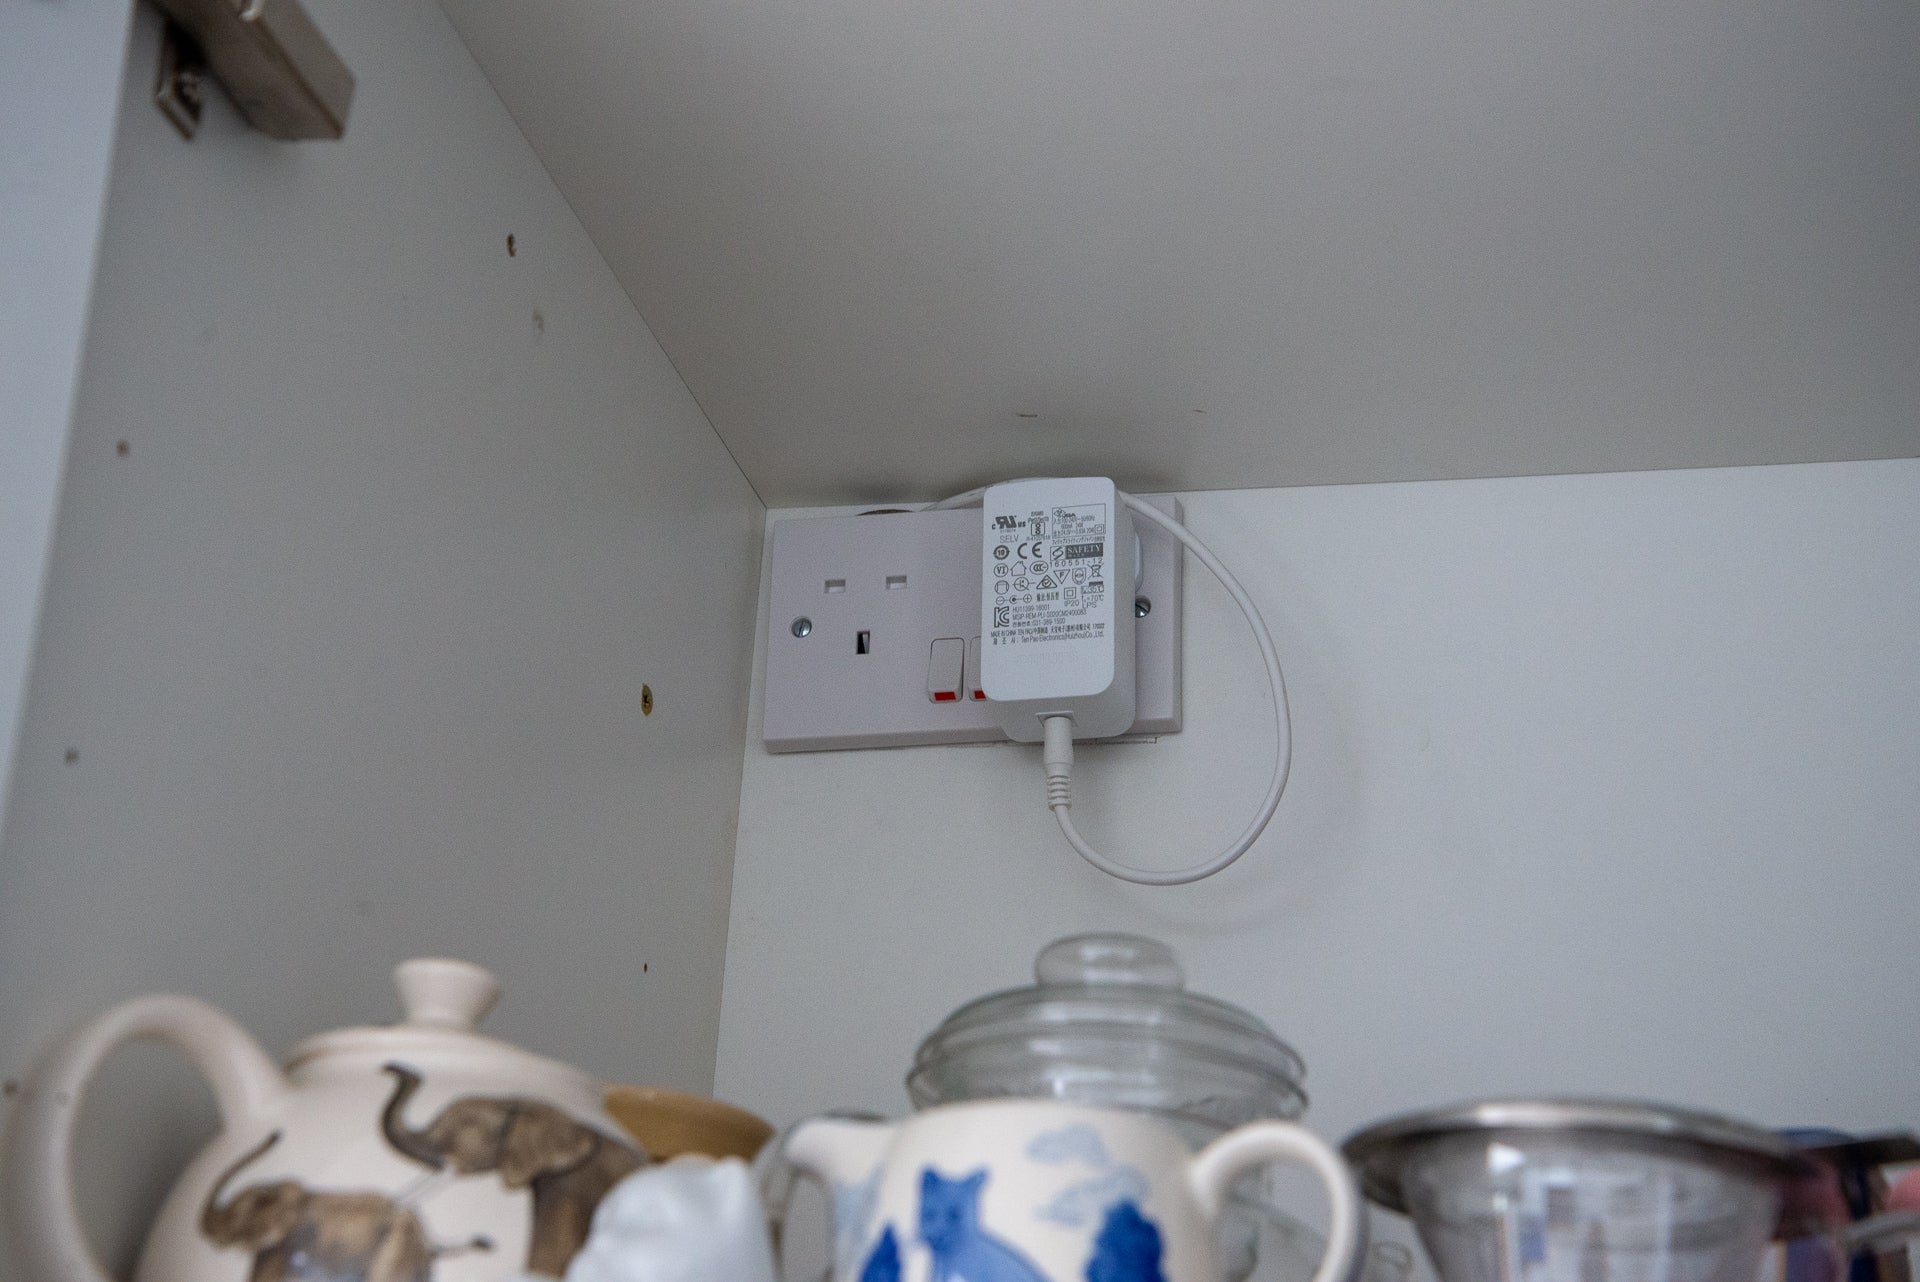 Build a smart home extension plug in a cupboard